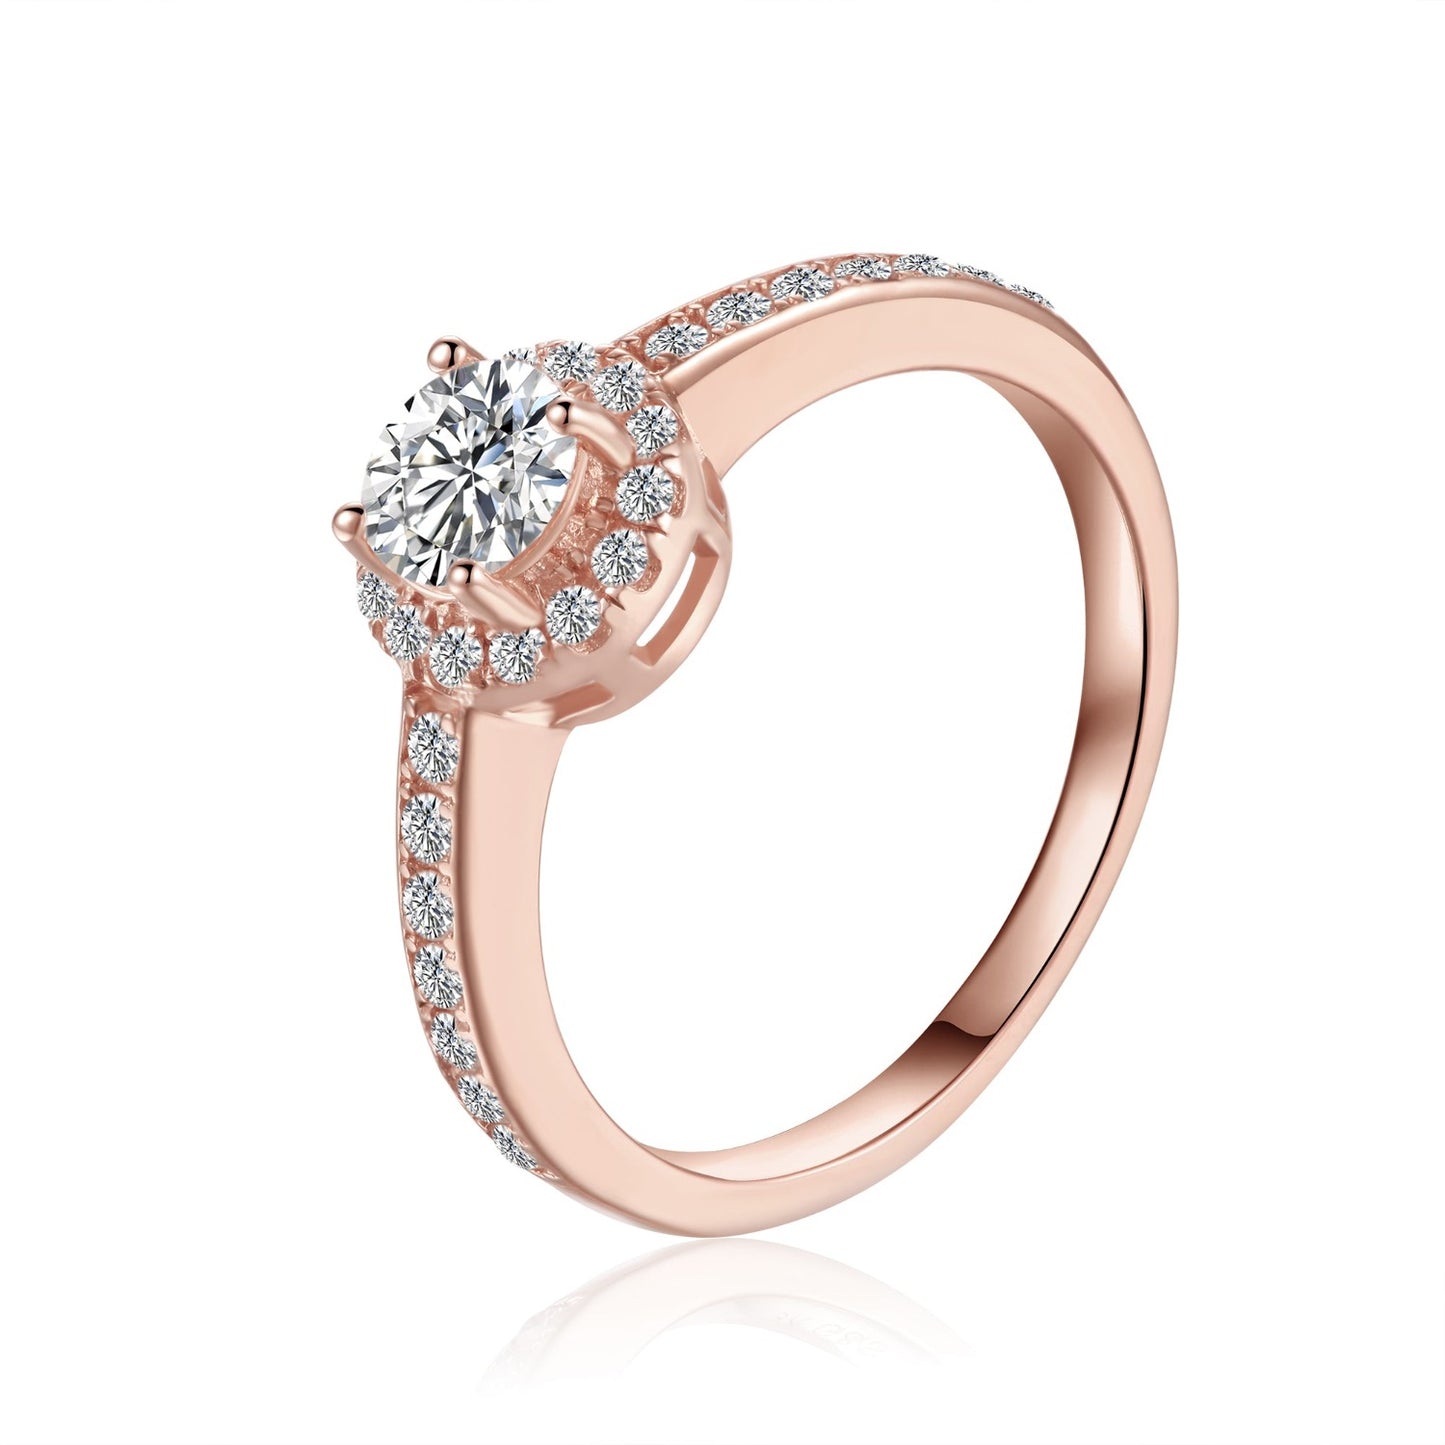 Pave Halo 0.50ct Moissanite Engagement Ring Set in 9ct Rose Gold